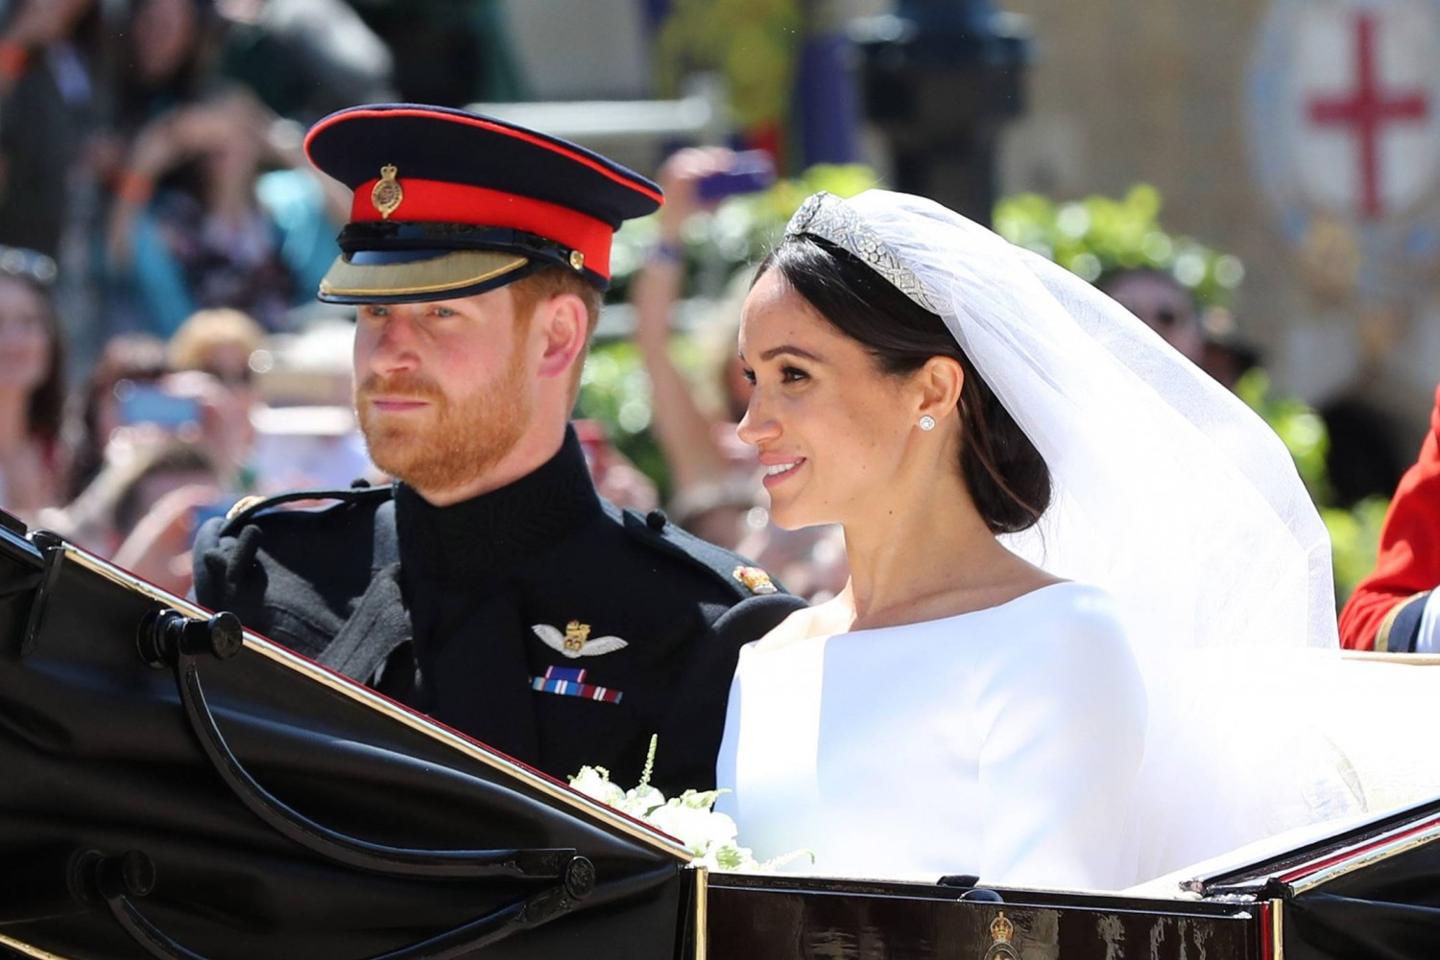 What exquisite jewels and diamonds graced the wedding of Prince Harry and Meghan Markle?